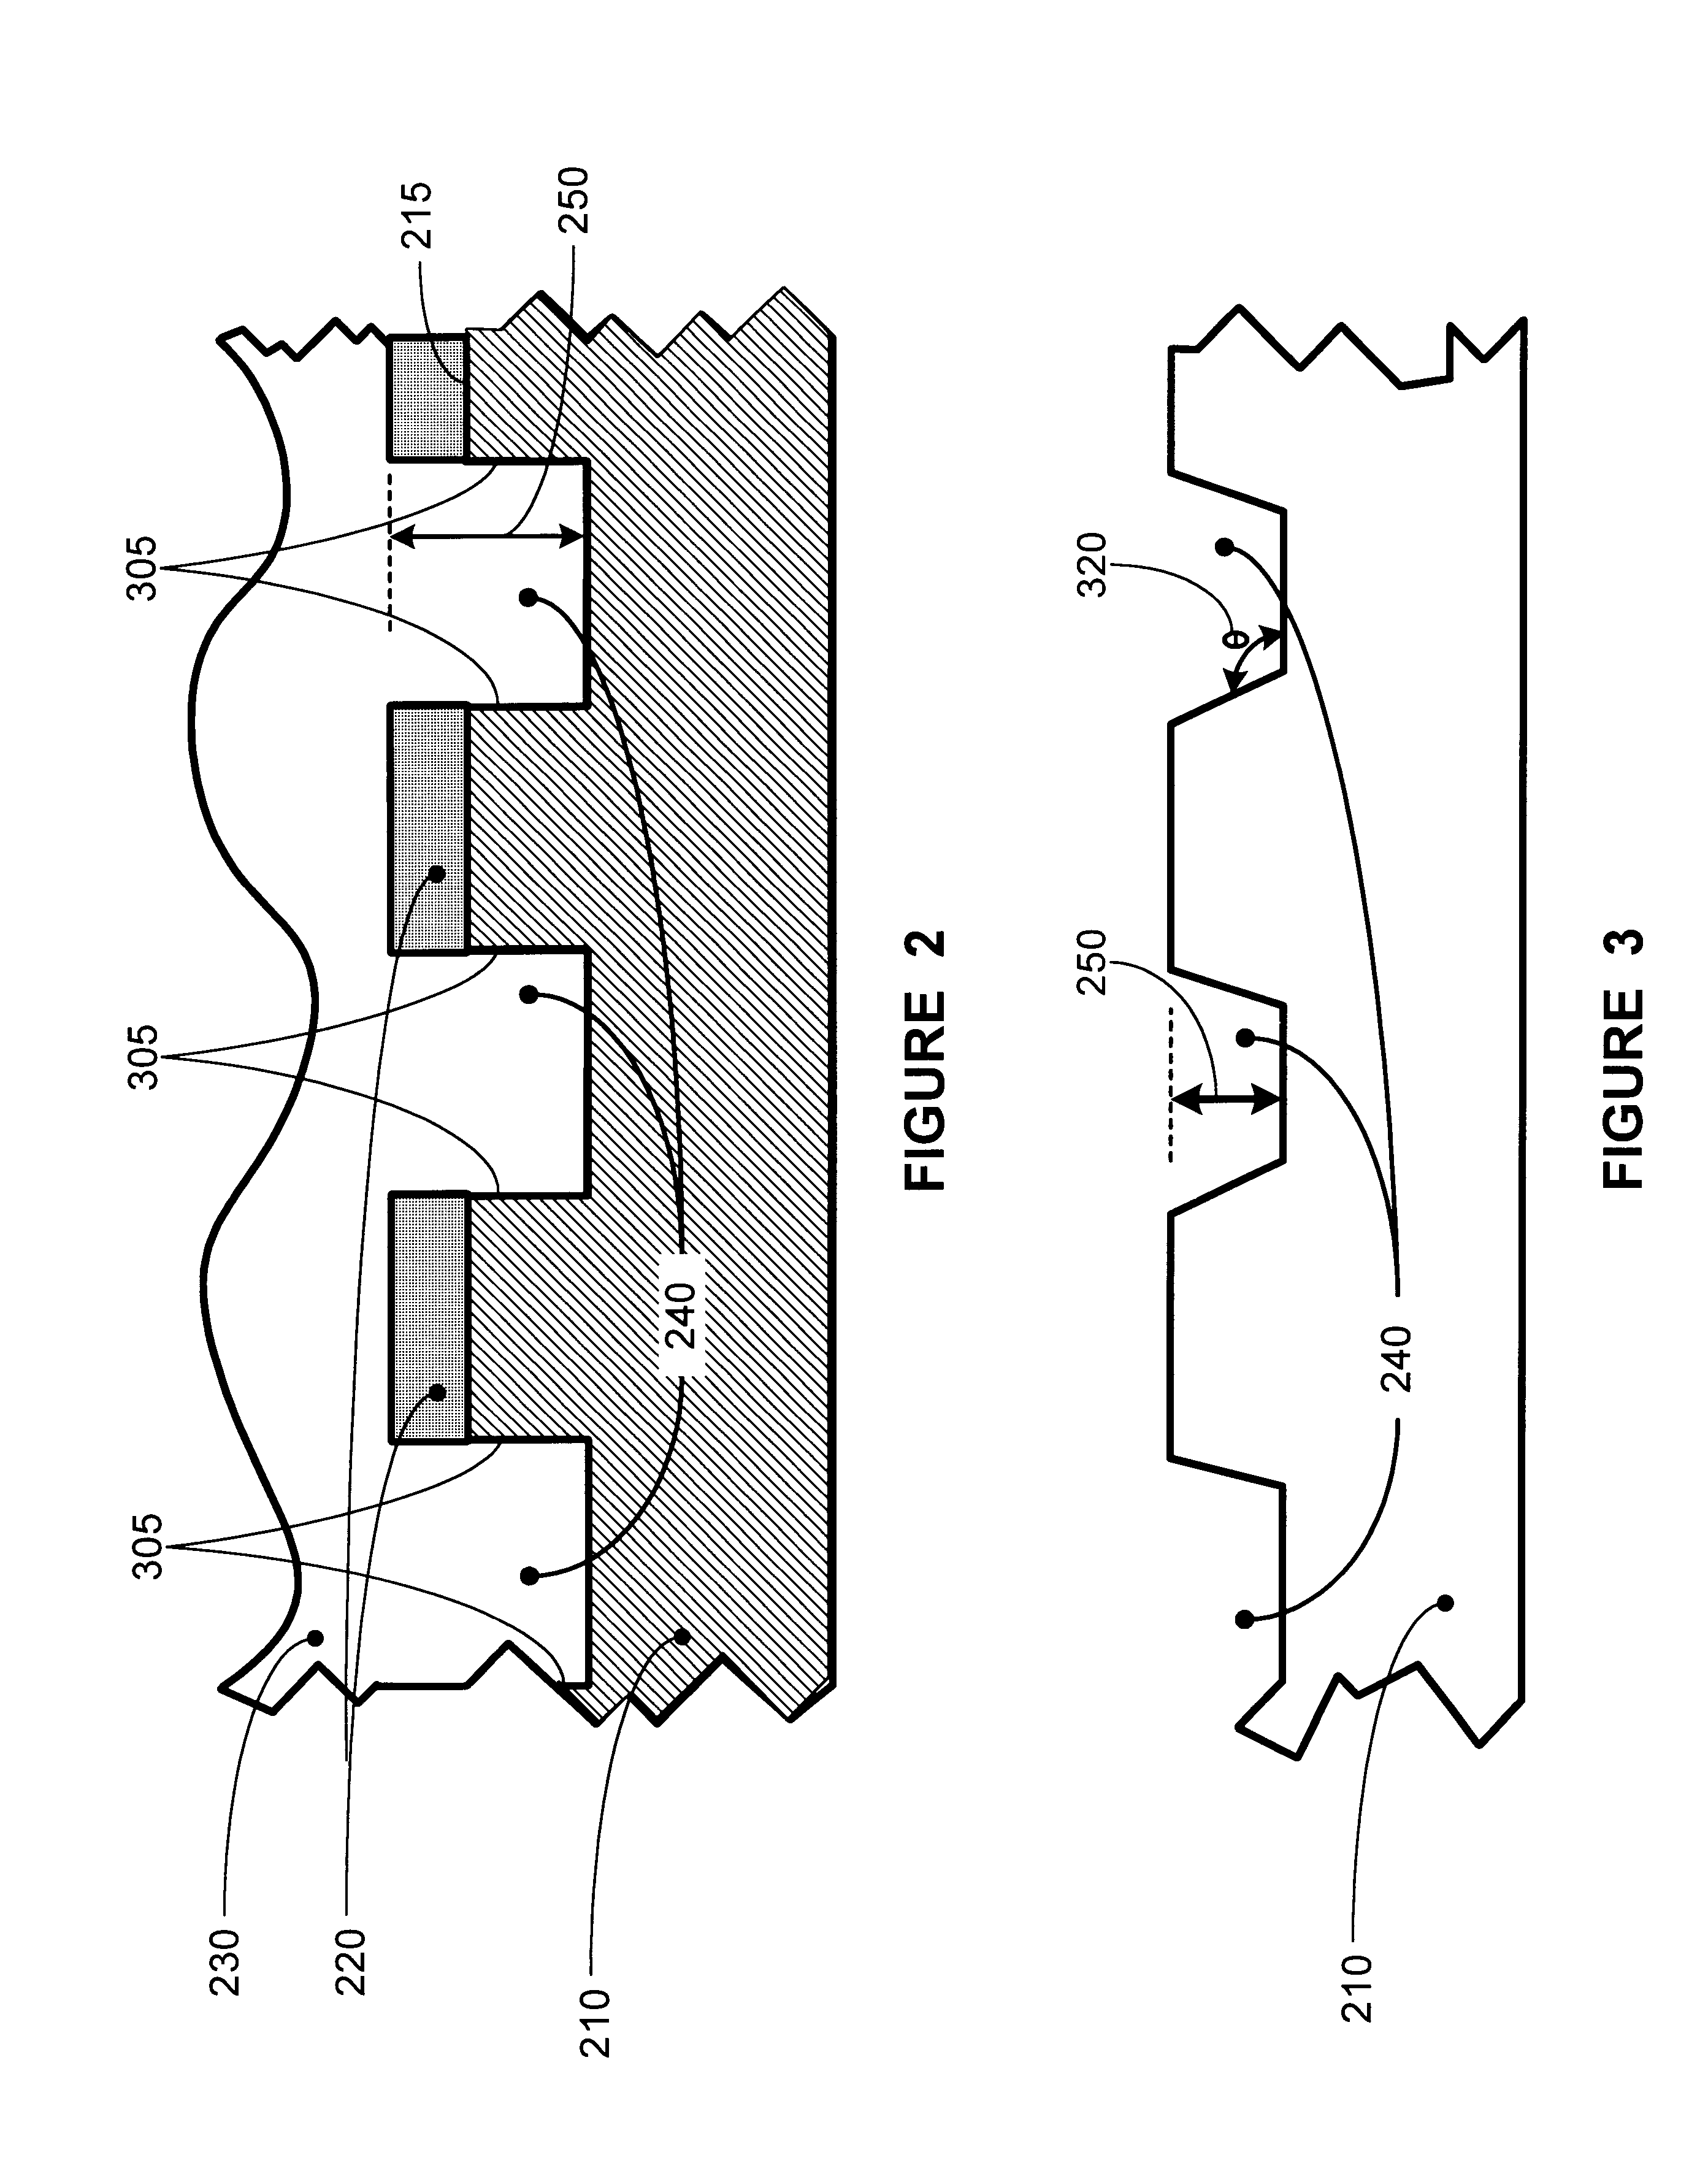 Method and apparatus for run-to-run control of trench profiles